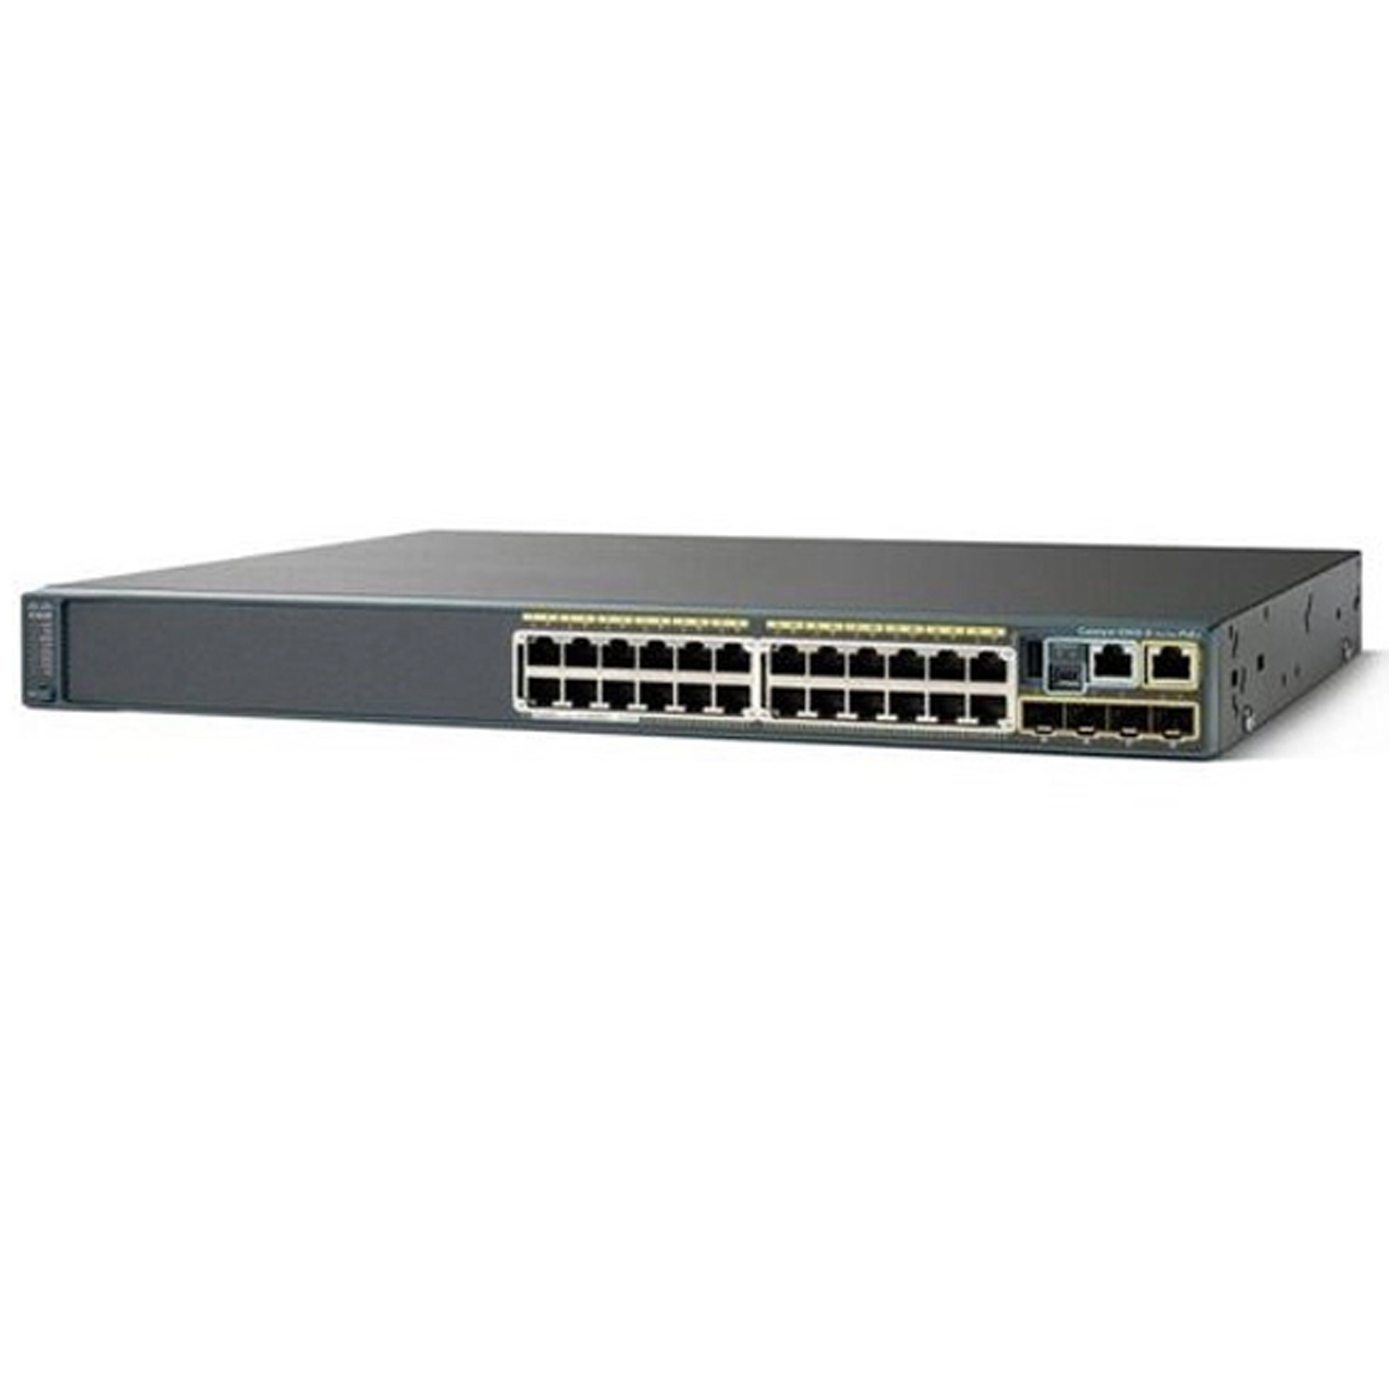 Refurbished and Used cisco 2960s-24ps-l switch